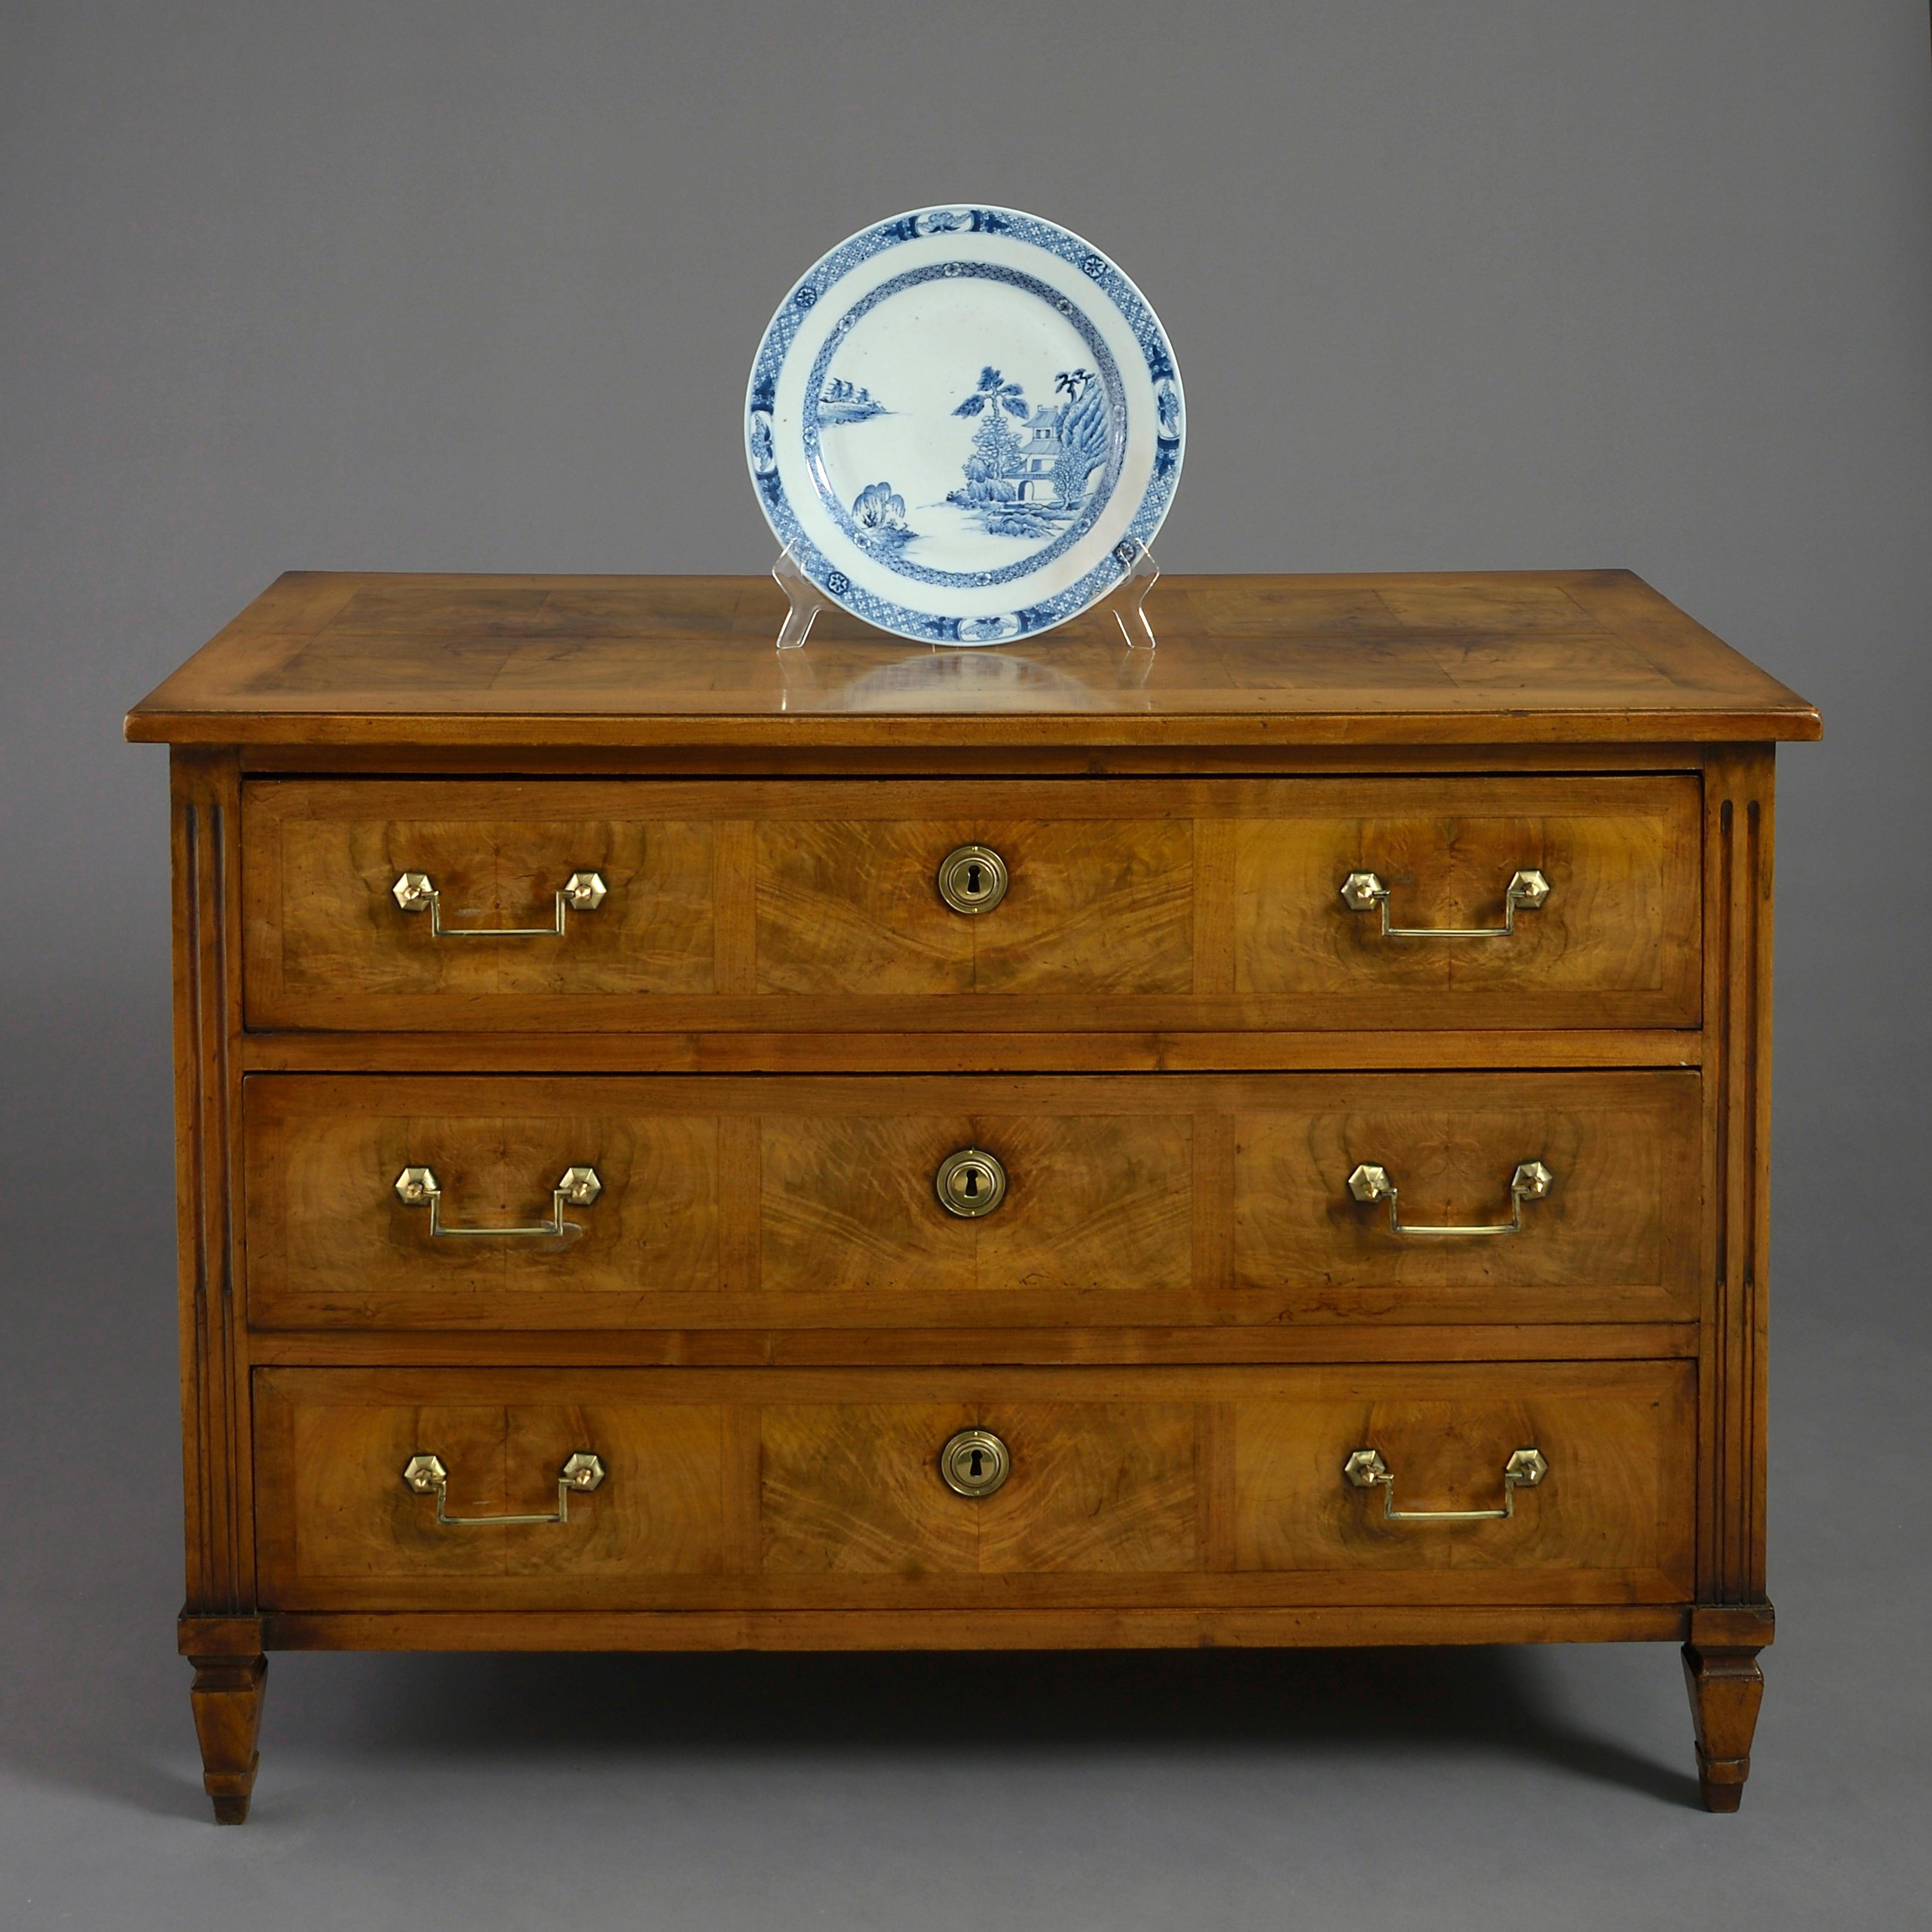 A good late 18th century walnut commode in the classical taste, with paneled veneers throughout, the three drawers with rectangular brass handles and medallion lock escutcheons and all raised on square tapering feet.